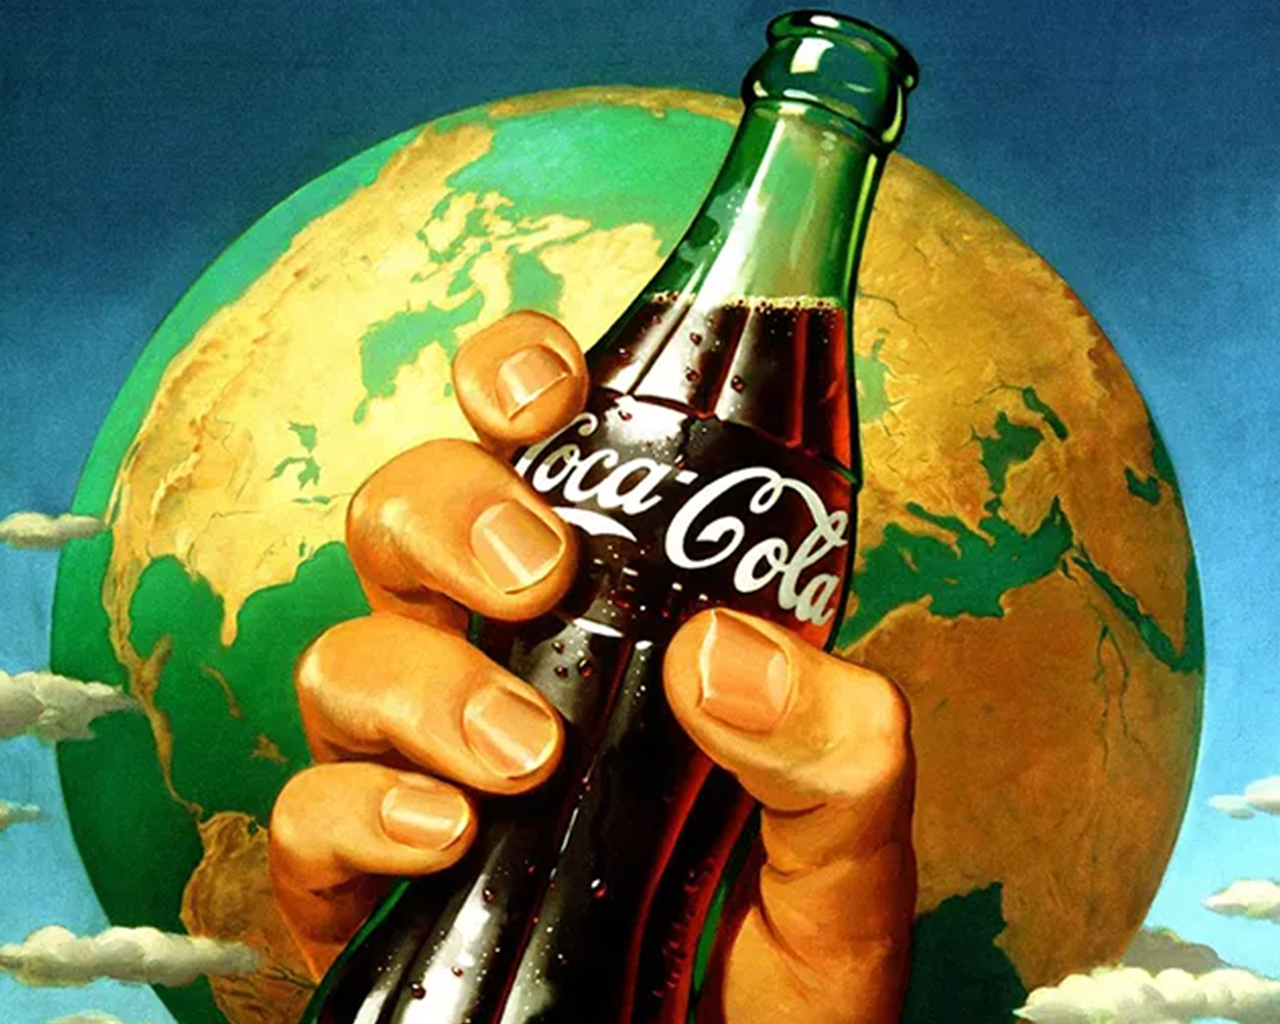 Vintage colorful illustration of a hand holding a Coca-Cola bottle in front of a terrestrial globe